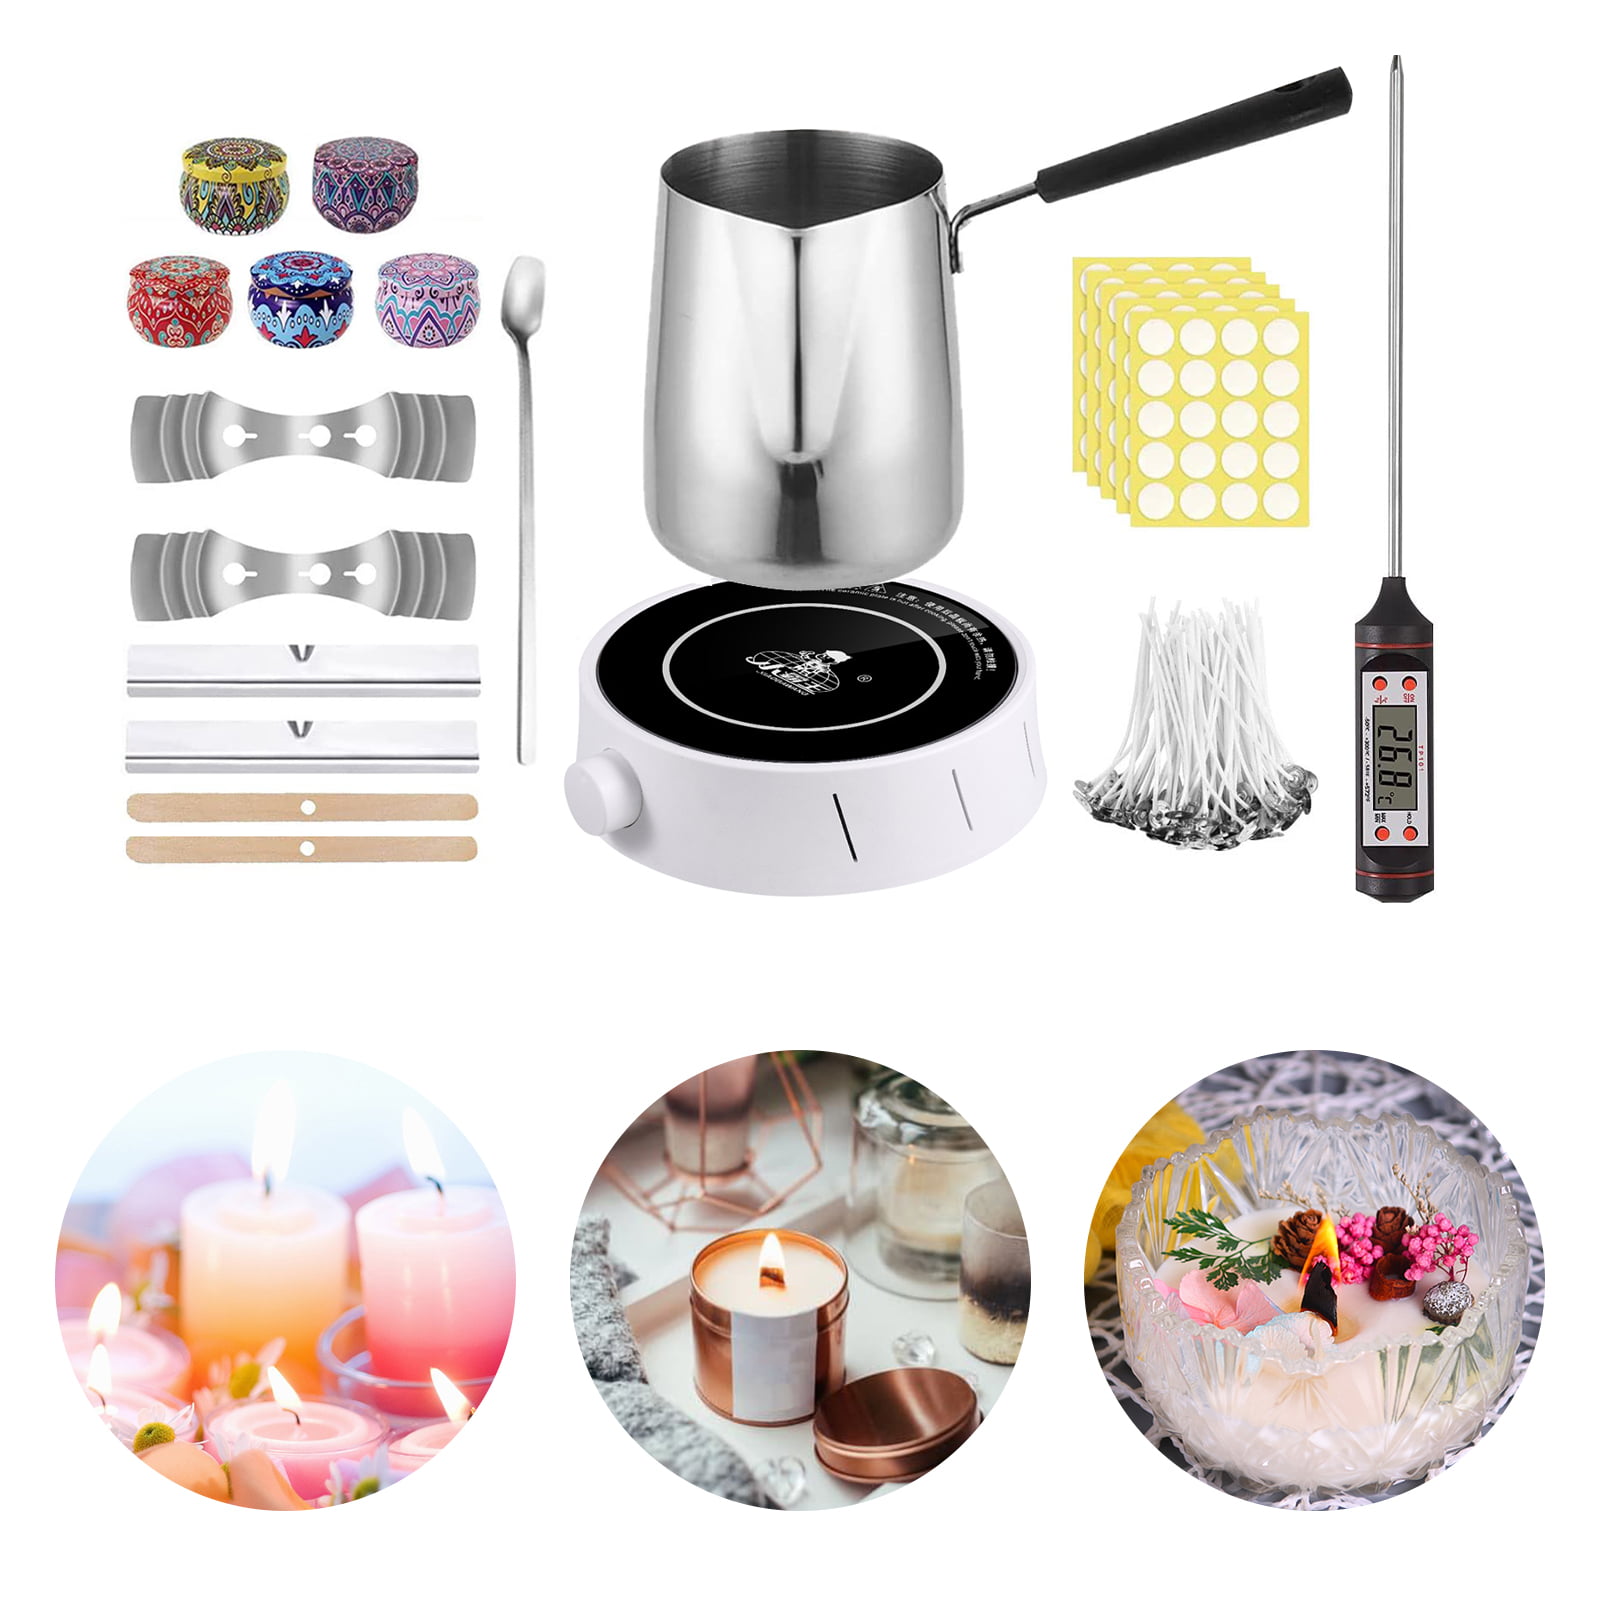 Benooa Candle Making Kit with Electric Hot Plate, DIY Scented